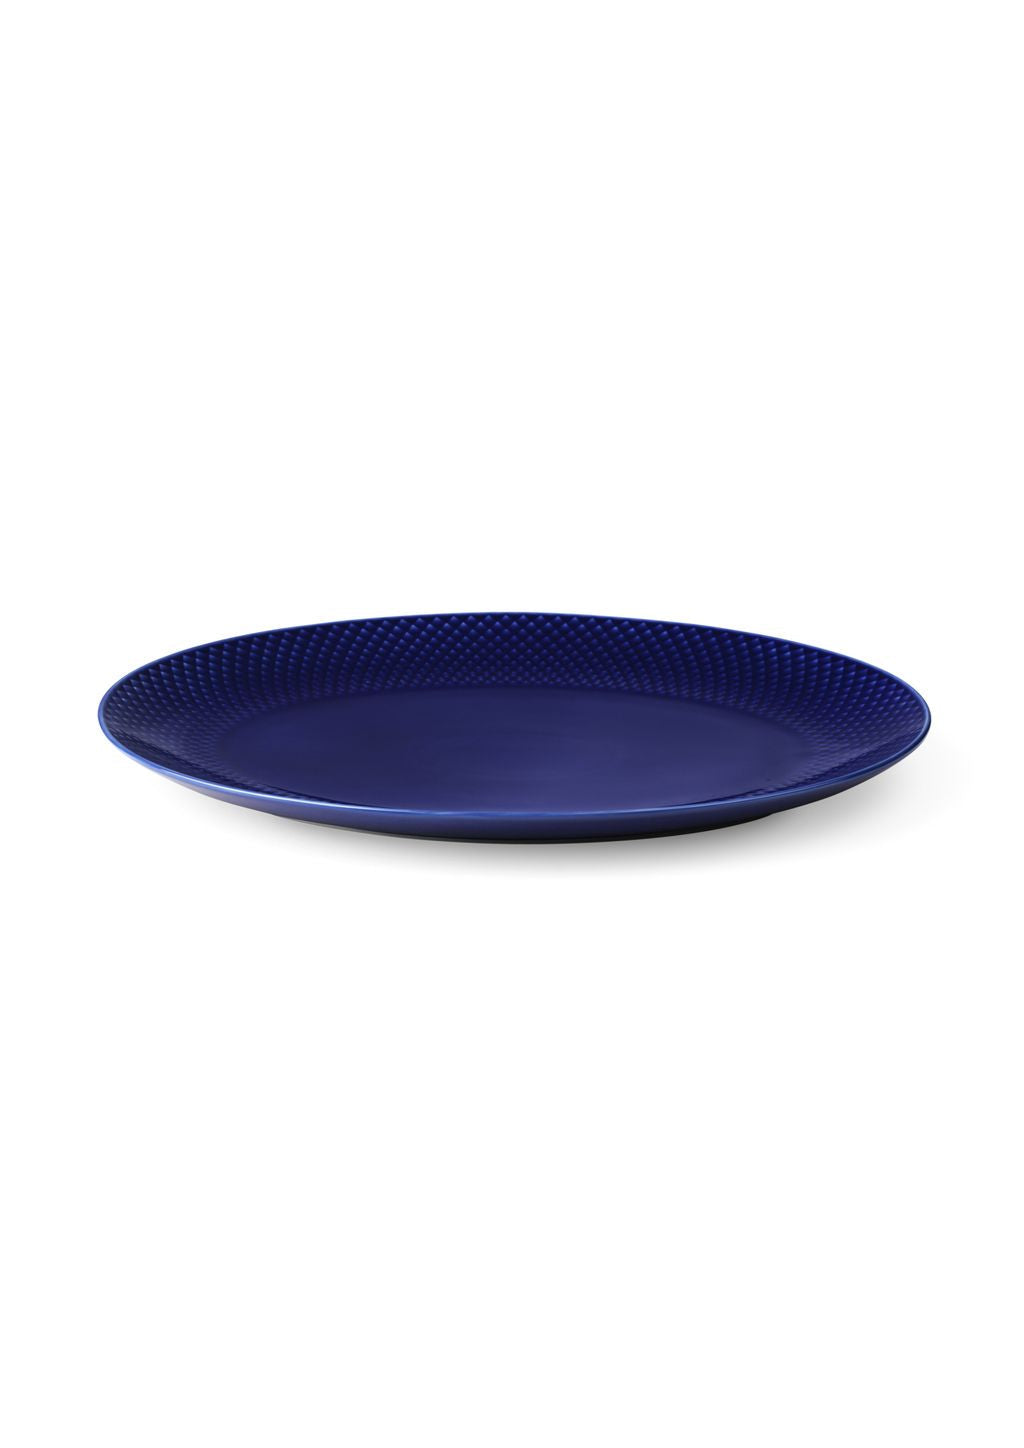 Lyngby Porcelæn Rhombe Color Oval Serving Plate 35x26,5, azul oscuro